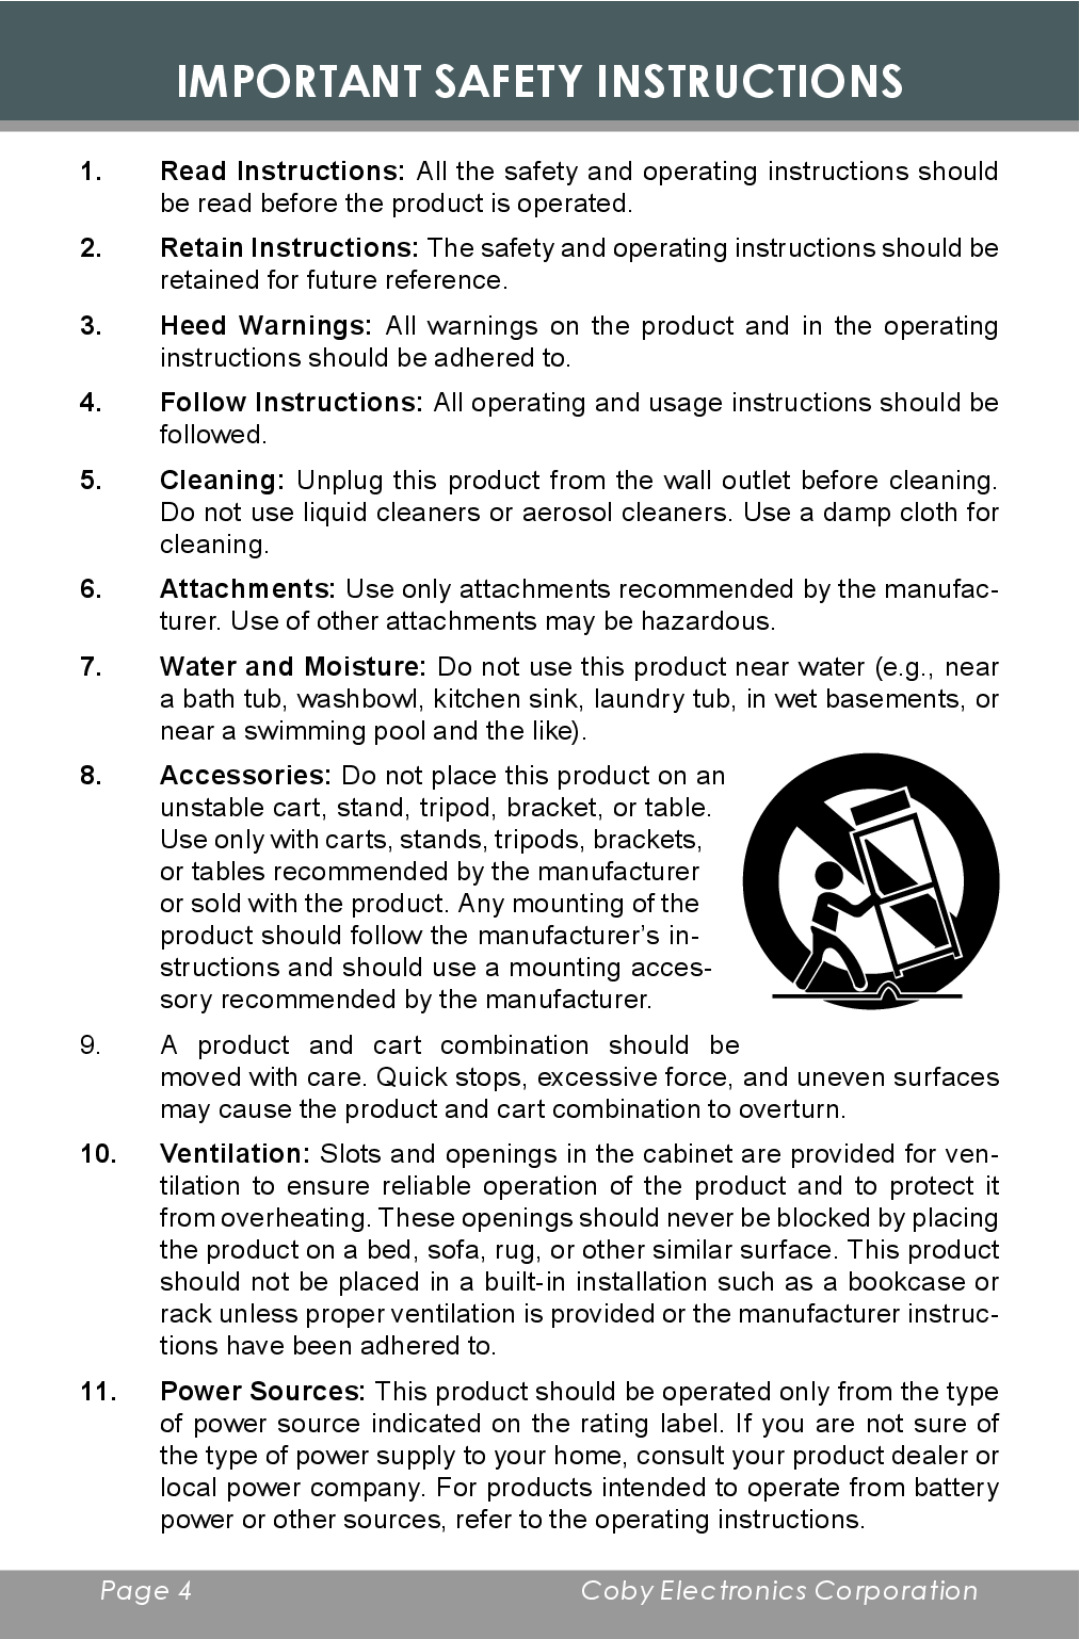 COBY electronic CD377 instruction manual Important Safety Instructions, Page , Coby Electronics Corporation 